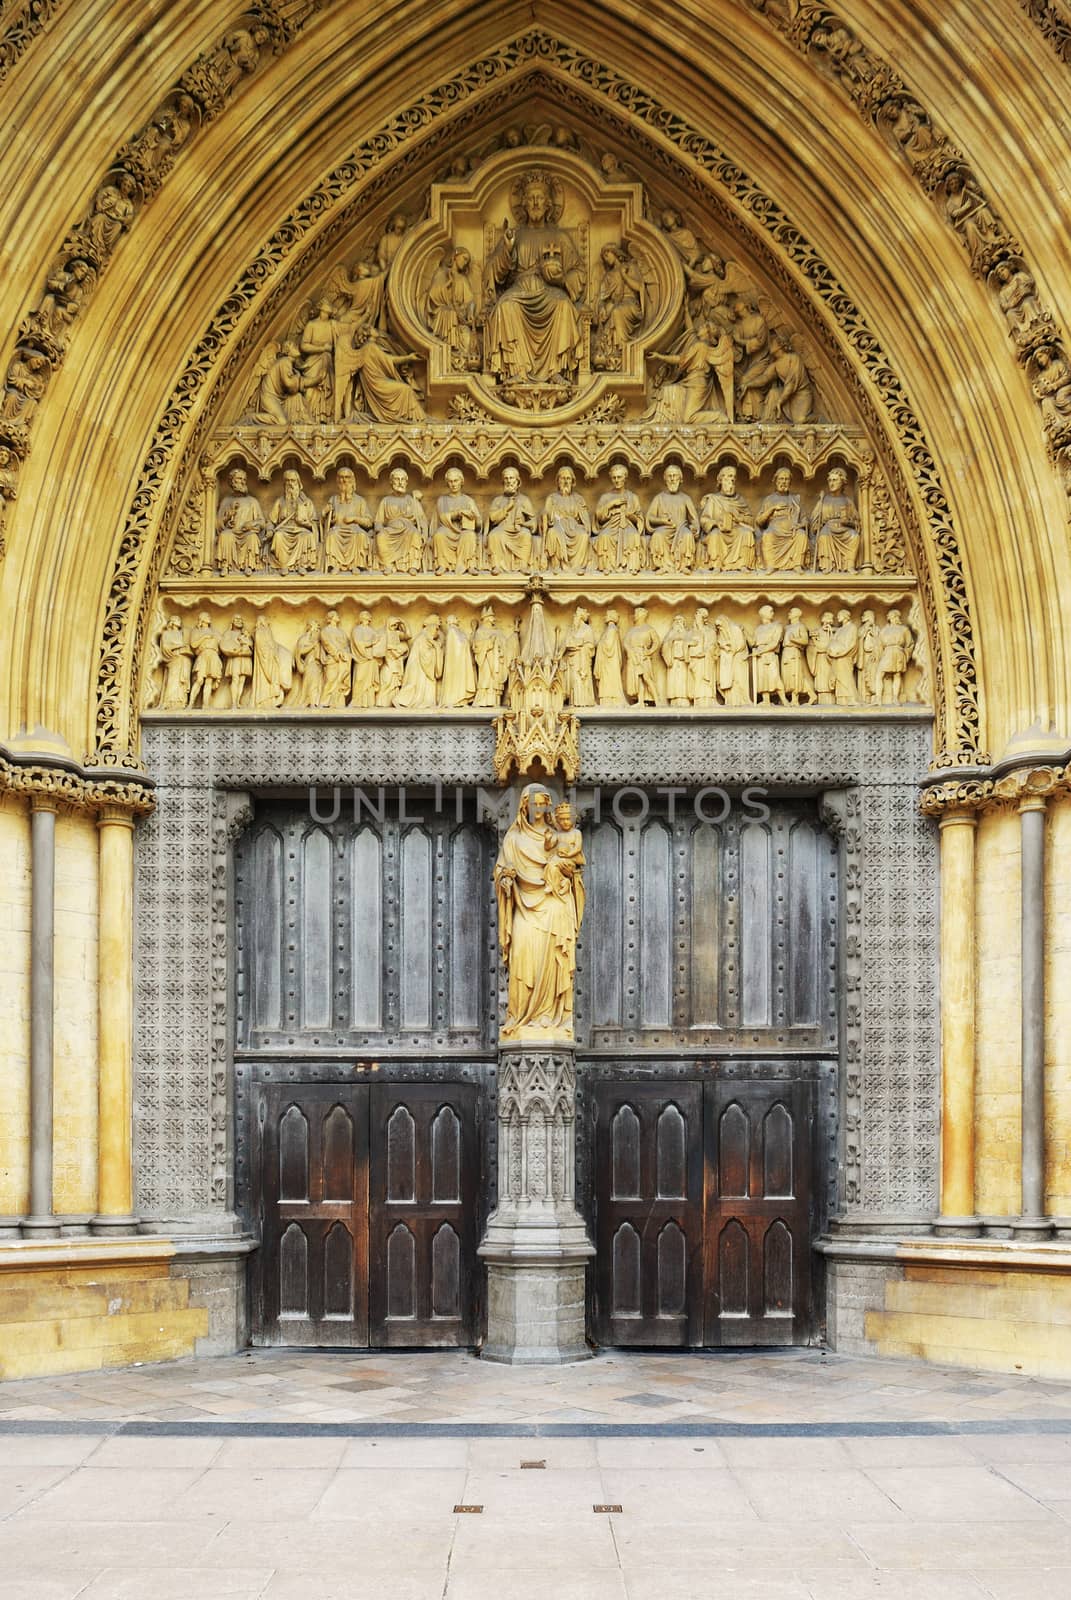 westminster abbey entrance by untouchablephoto